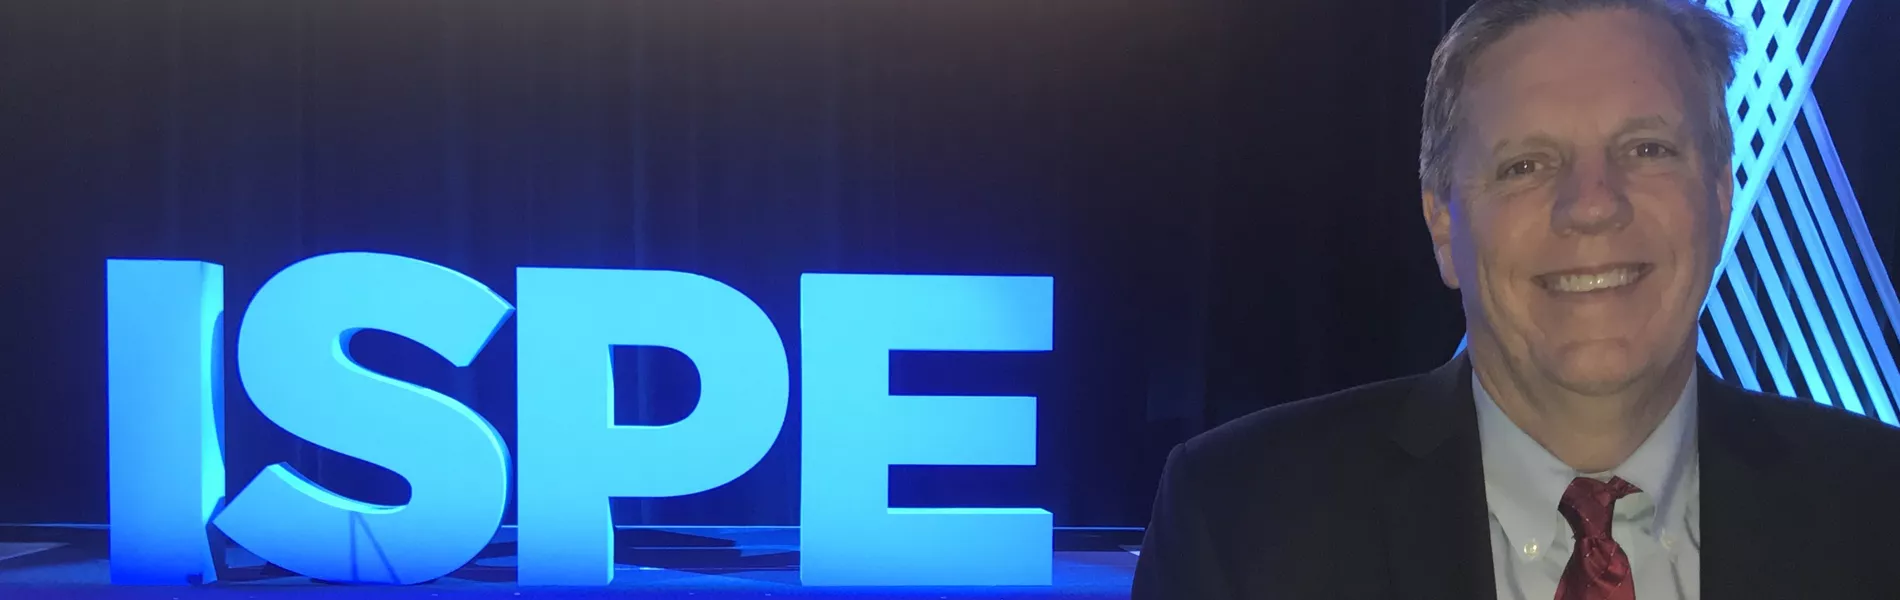 2019 ISPE Annual Meeting & Expo Outgoing Chair - James Breen